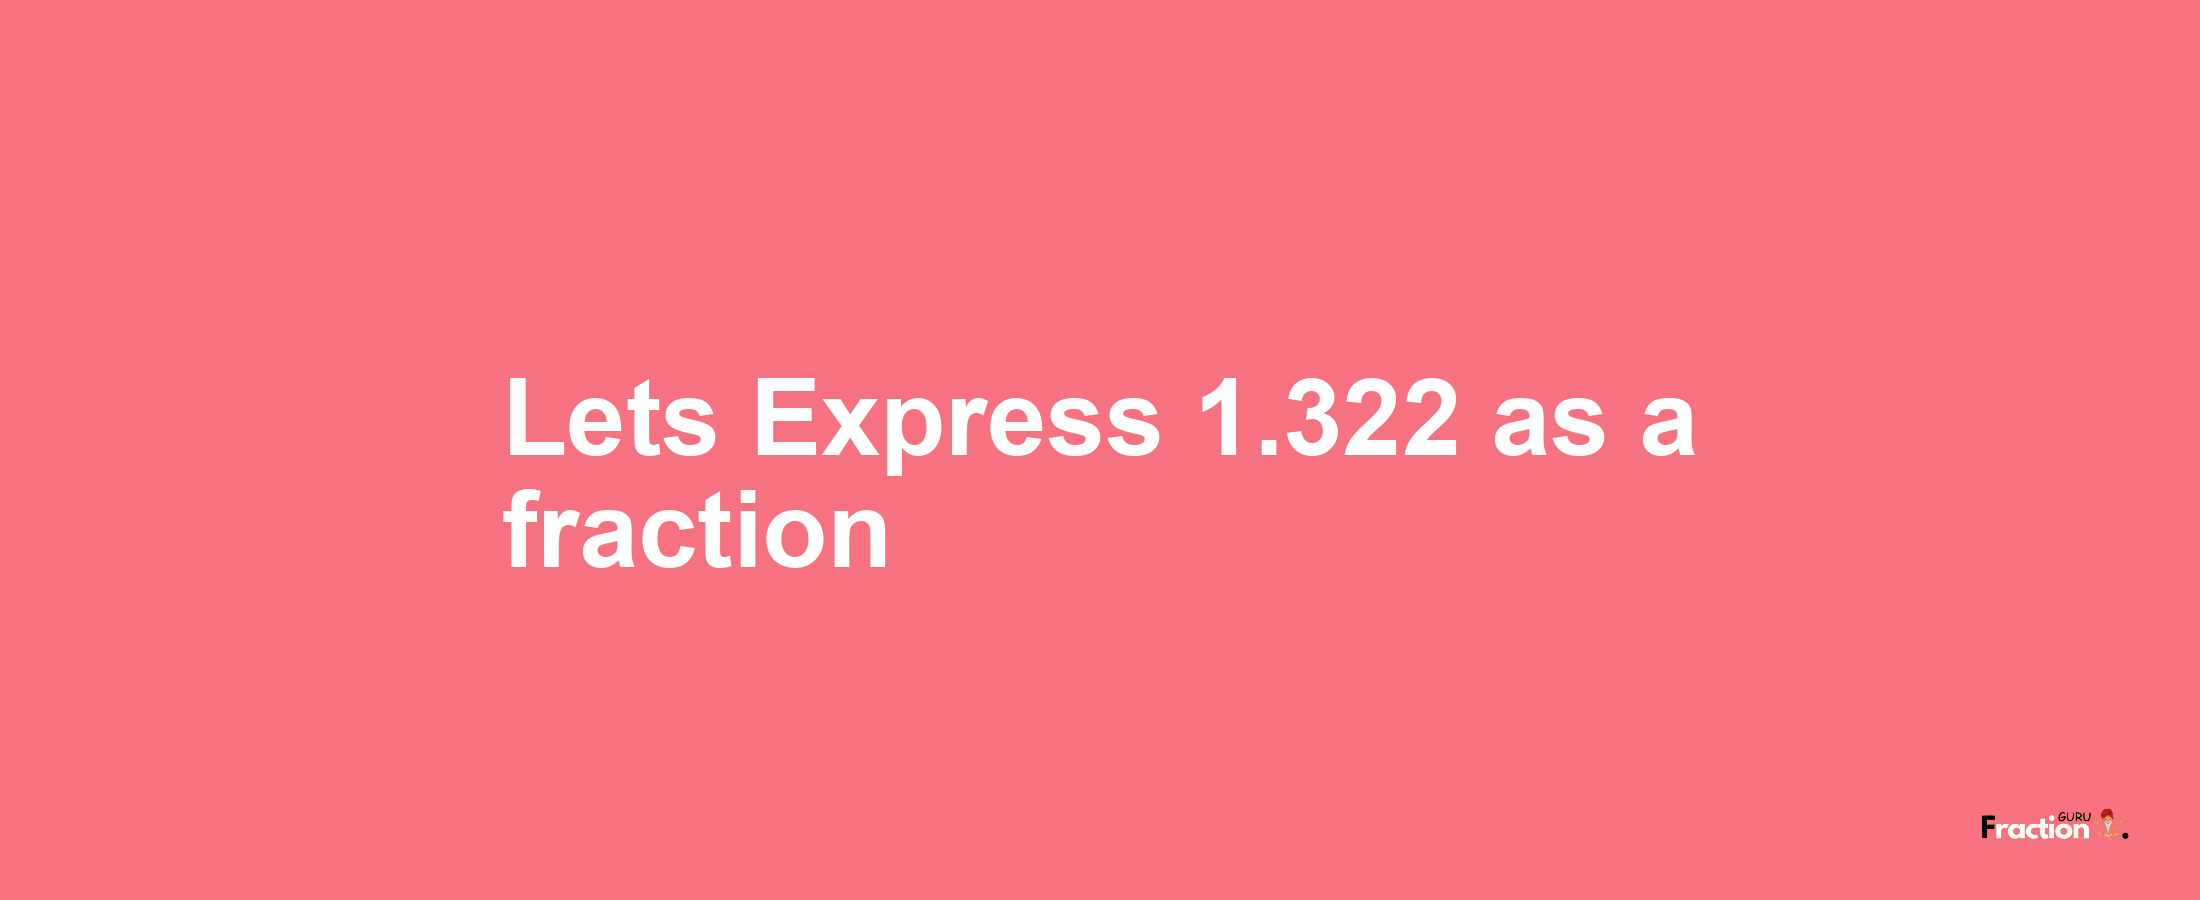 Lets Express 1.322 as afraction